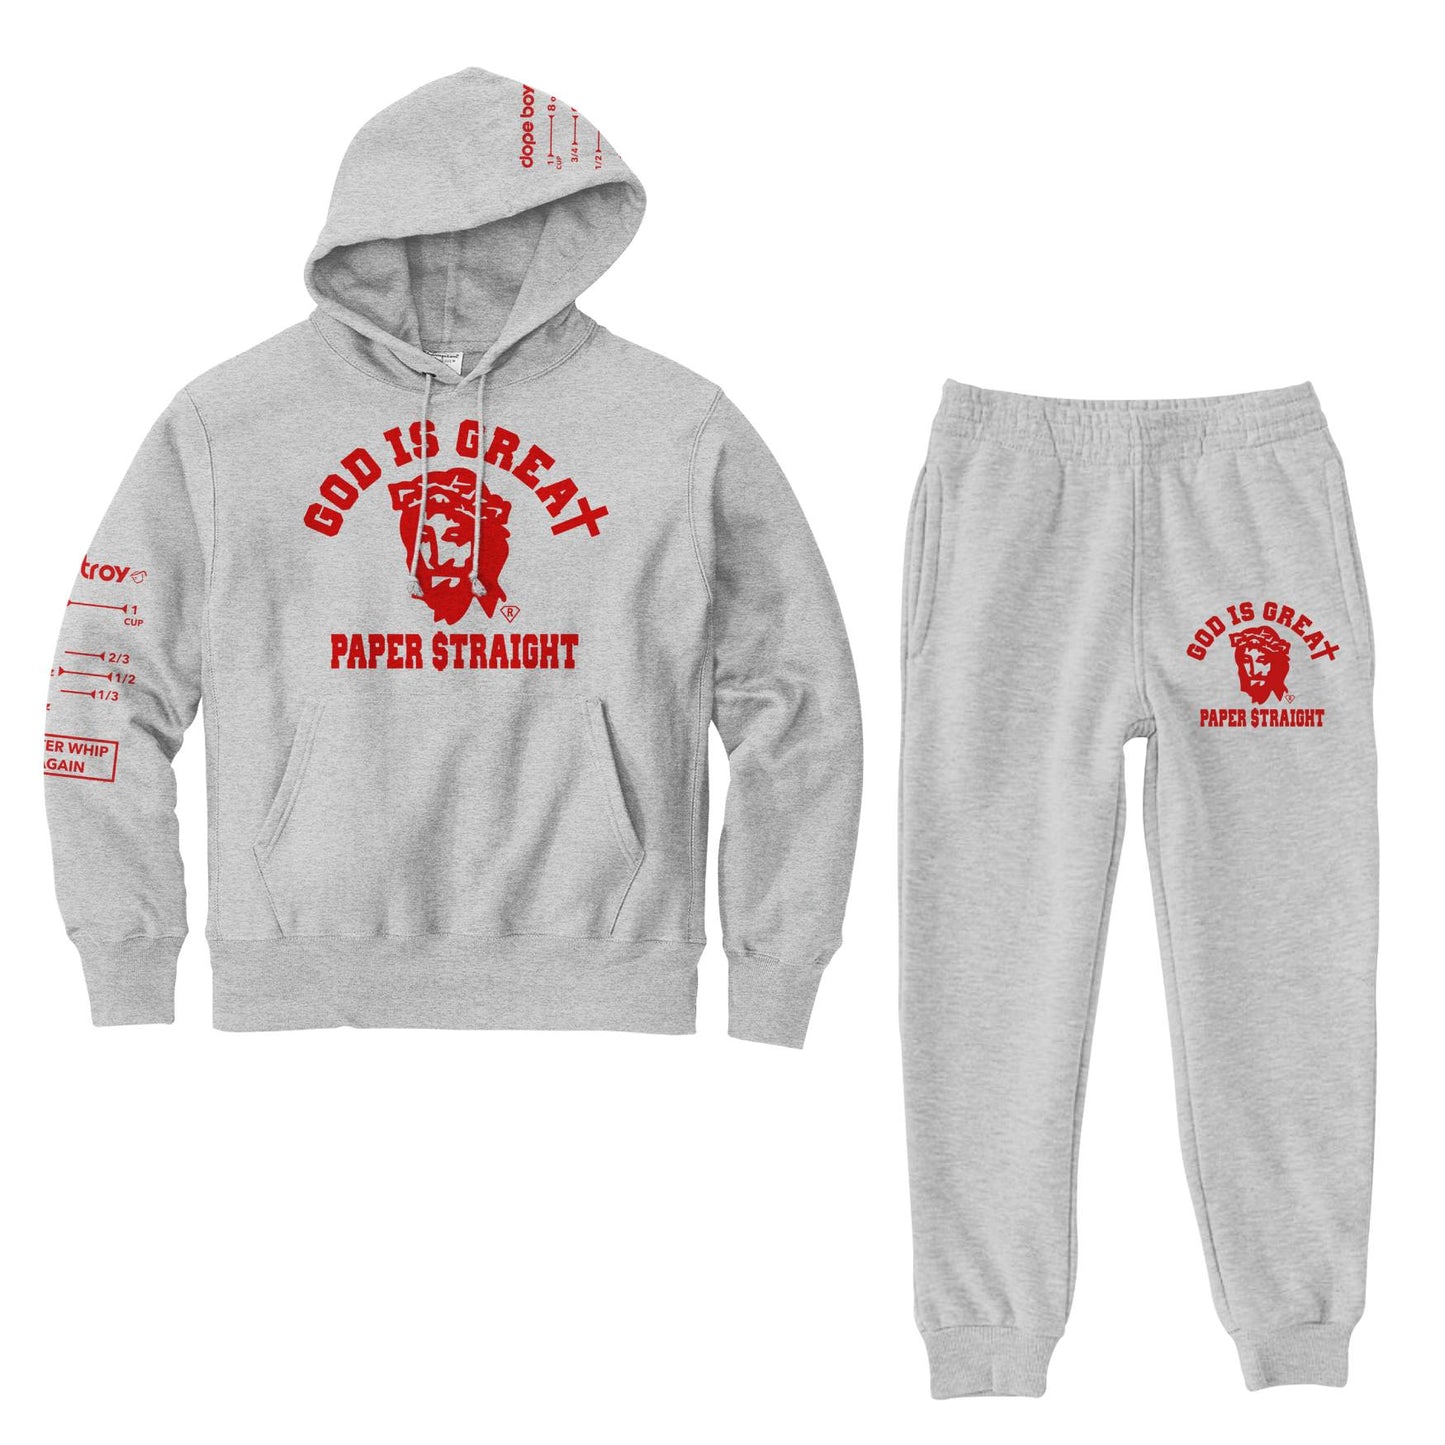 CLASSIC SWEAT SUIT - GREY & RED